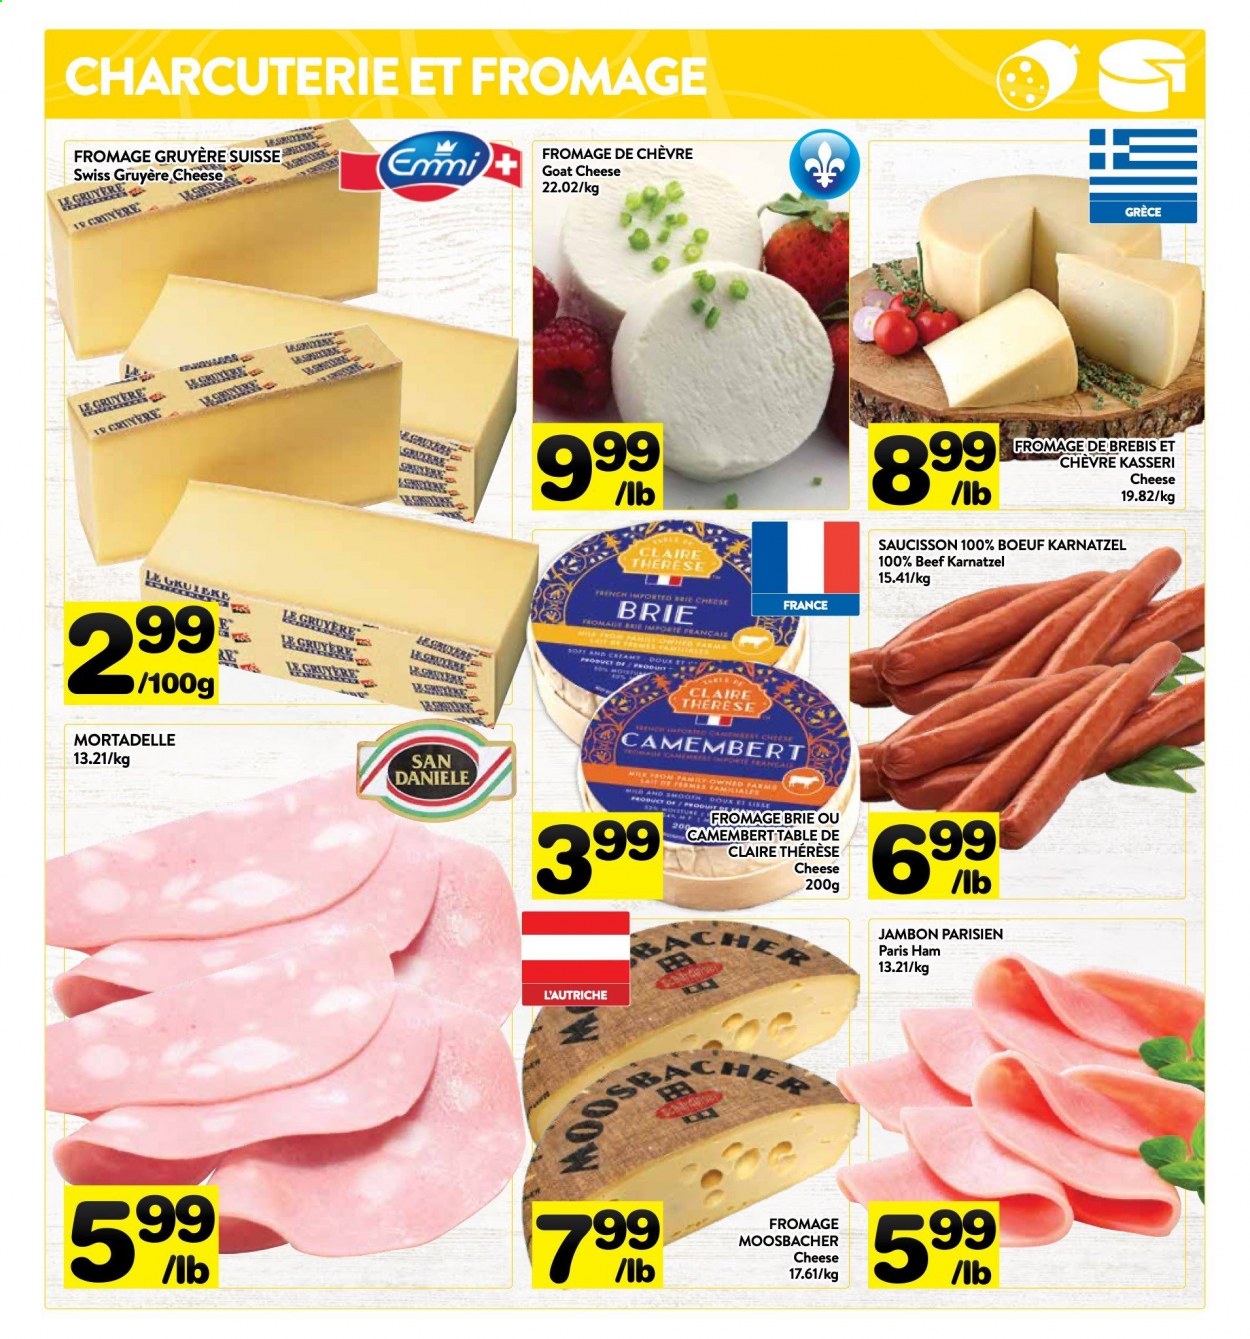 PA Supermarché flyer  - August 30, 2021 - September 05, 2021.